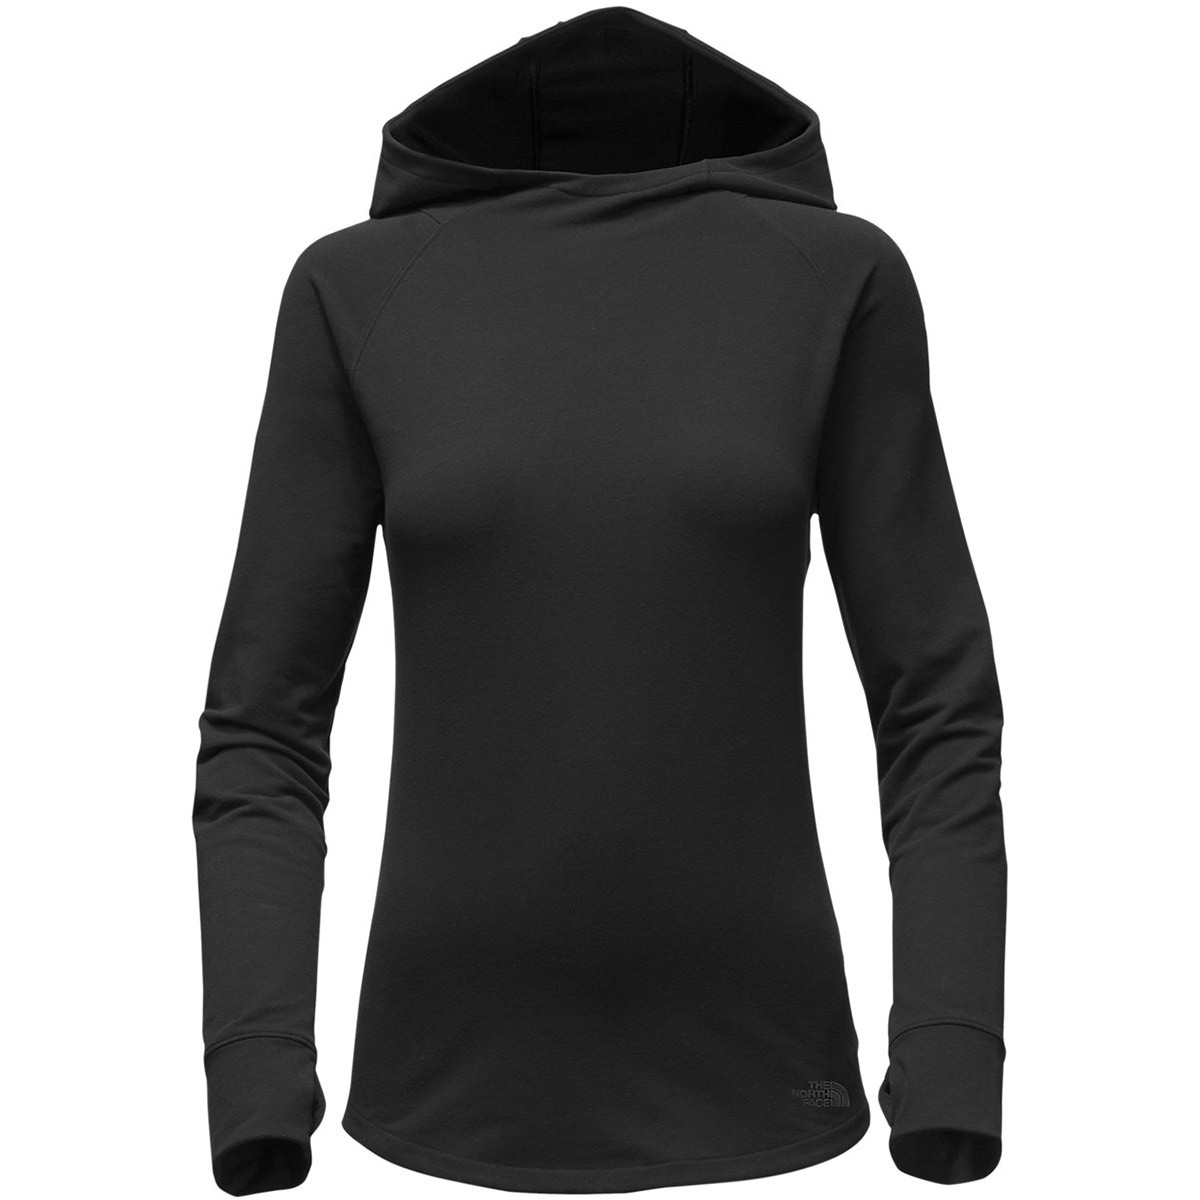 Áo THE NORTHFACE WOMEN’S NF0A2THK THE HOODSTER HOODIES SIZE M